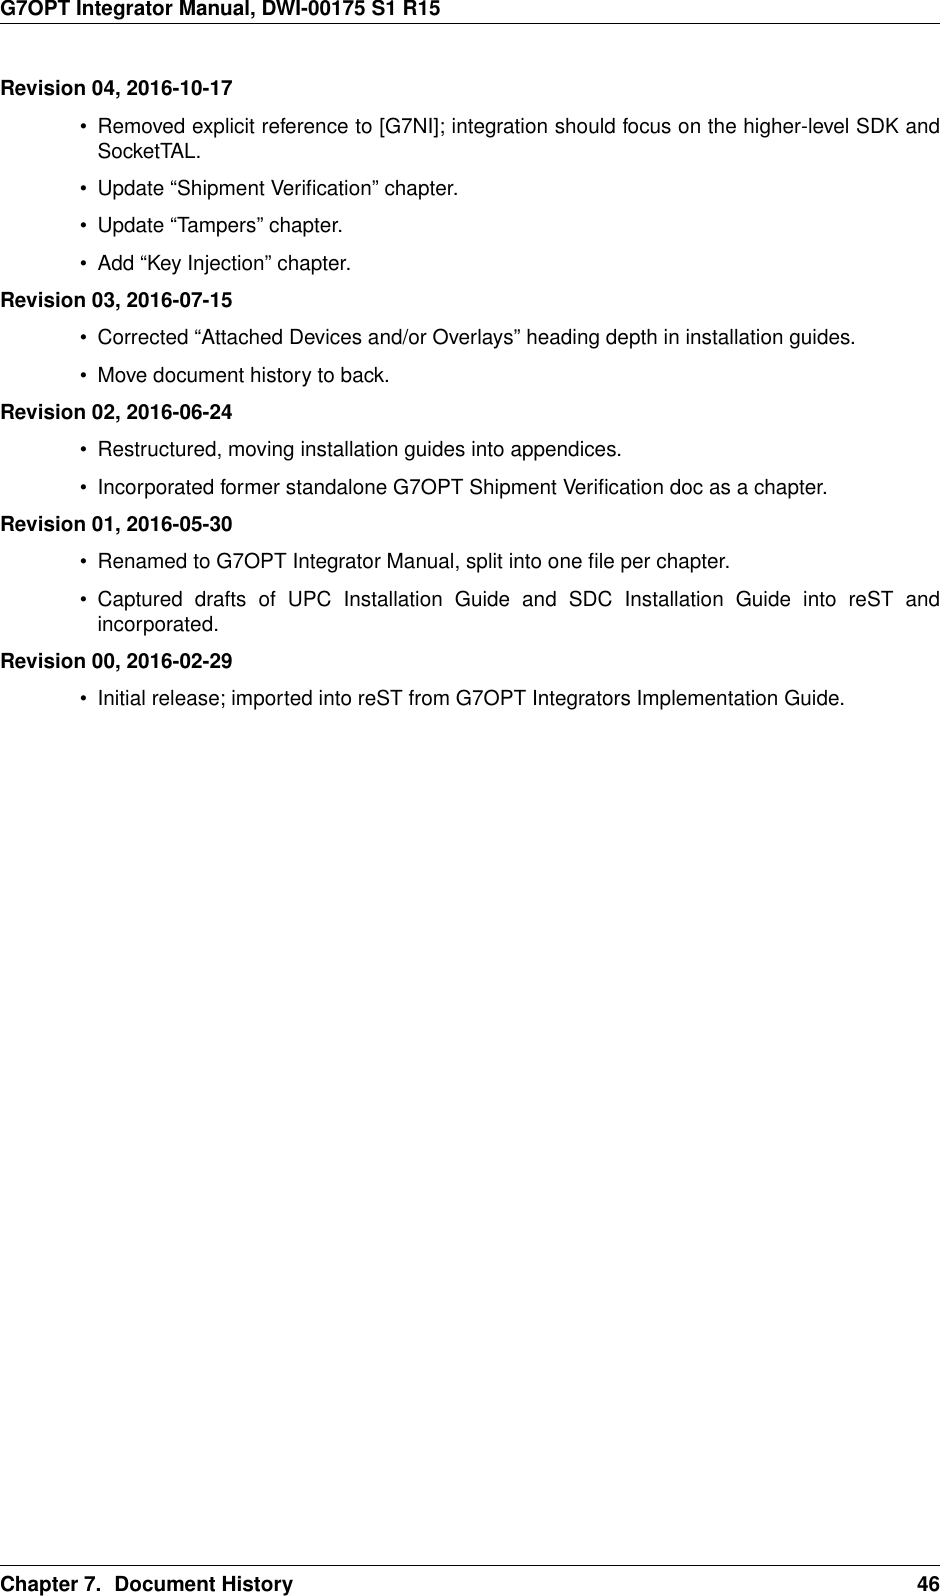 G7OPT Integrator Manual, DWI-00175 S1 R15Revision 04, 2016-10-17• Removed explicit reference to [G7NI]; integration should focus on the higher-level SDK andSocketTAL.• Update “Shipment Veriﬁcation” chapter.• Update “Tampers” chapter.• Add “Key Injection” chapter.Revision 03, 2016-07-15• Corrected “Attached Devices and/or Overlays” heading depth in installation guides.• Move document history to back.Revision 02, 2016-06-24• Restructured, moving installation guides into appendices.• Incorporated former standalone G7OPT Shipment Veriﬁcation doc as a chapter.Revision 01, 2016-05-30• Renamed to G7OPT Integrator Manual, split into one ﬁle per chapter.• Captured drafts of UPC Installation Guide and SDC Installation Guide into reST andincorporated.Revision 00, 2016-02-29• Initial release; imported into reST from G7OPT Integrators Implementation Guide.Chapter 7. Document History 46